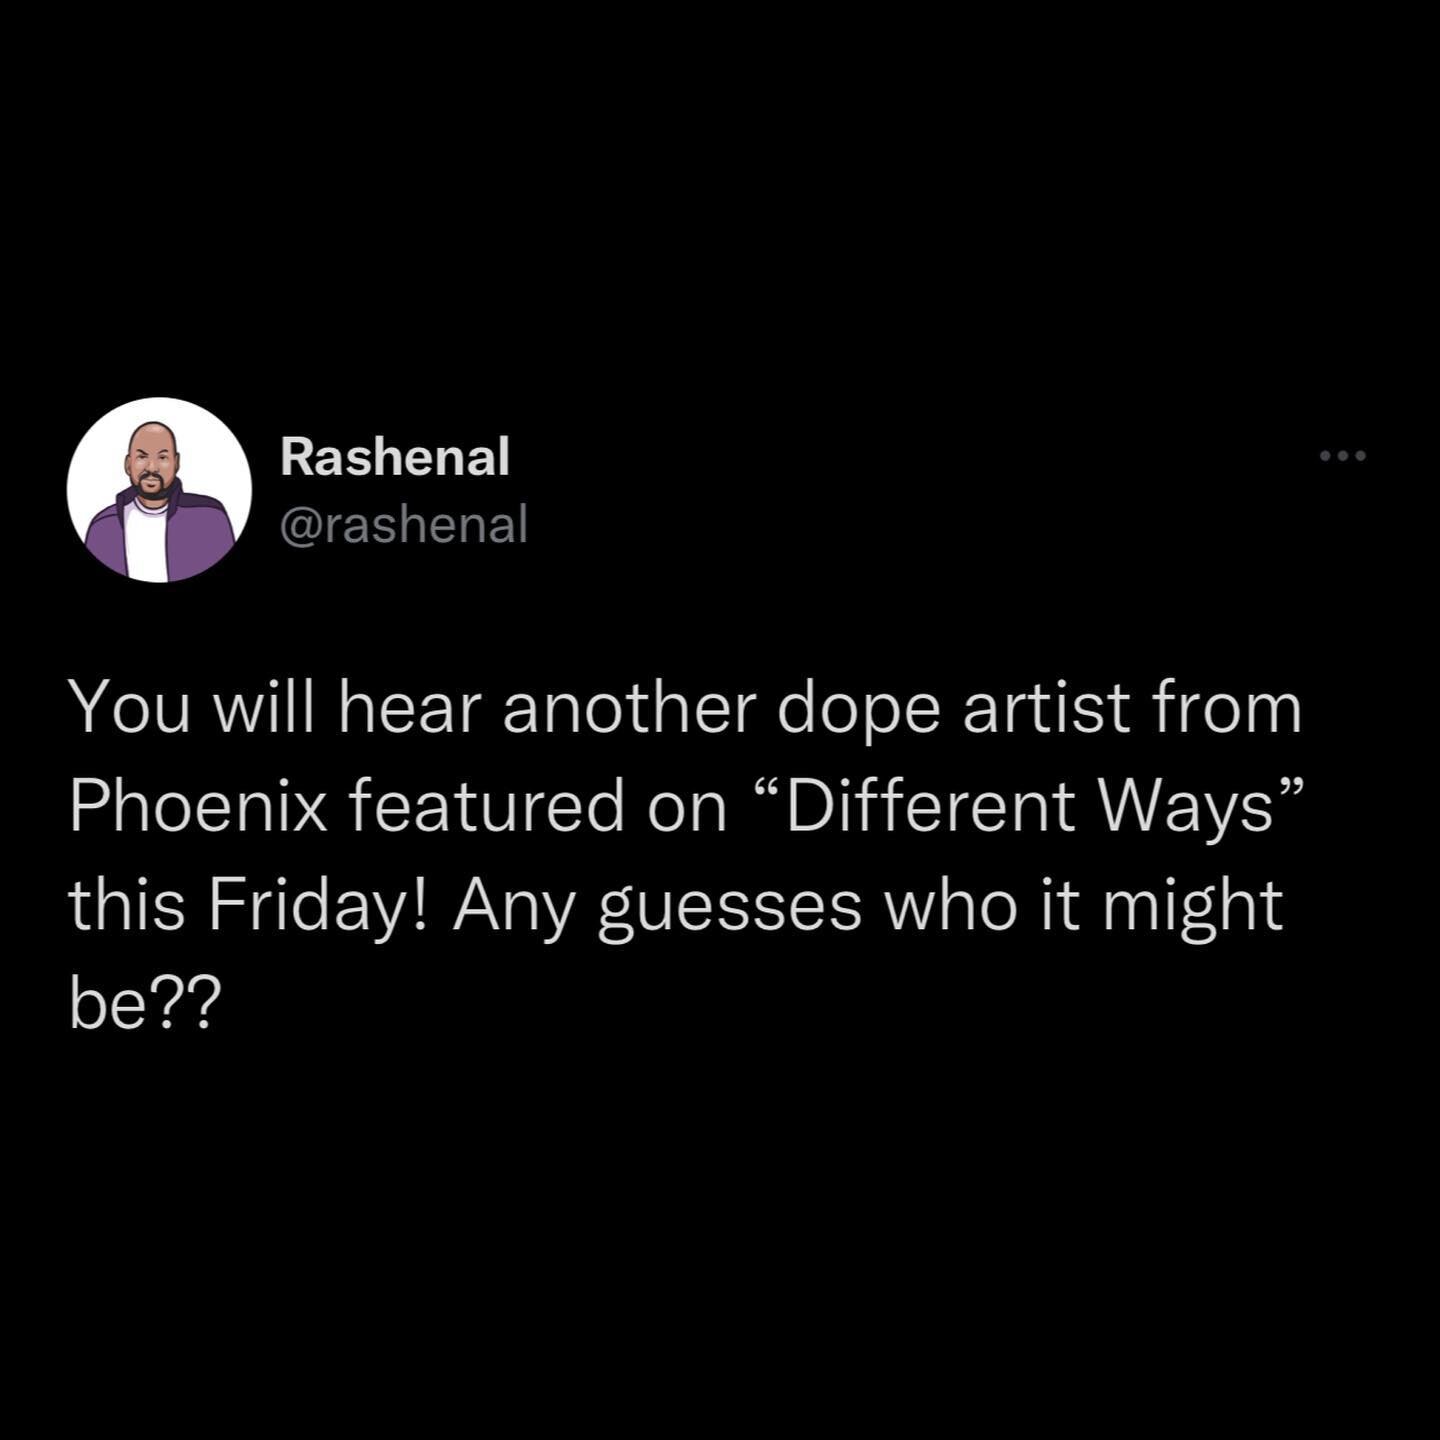 You will hear another dope artist from Phoenix featured on &ldquo;Different Ways&rdquo; this Friday! Any guesses who it might be??